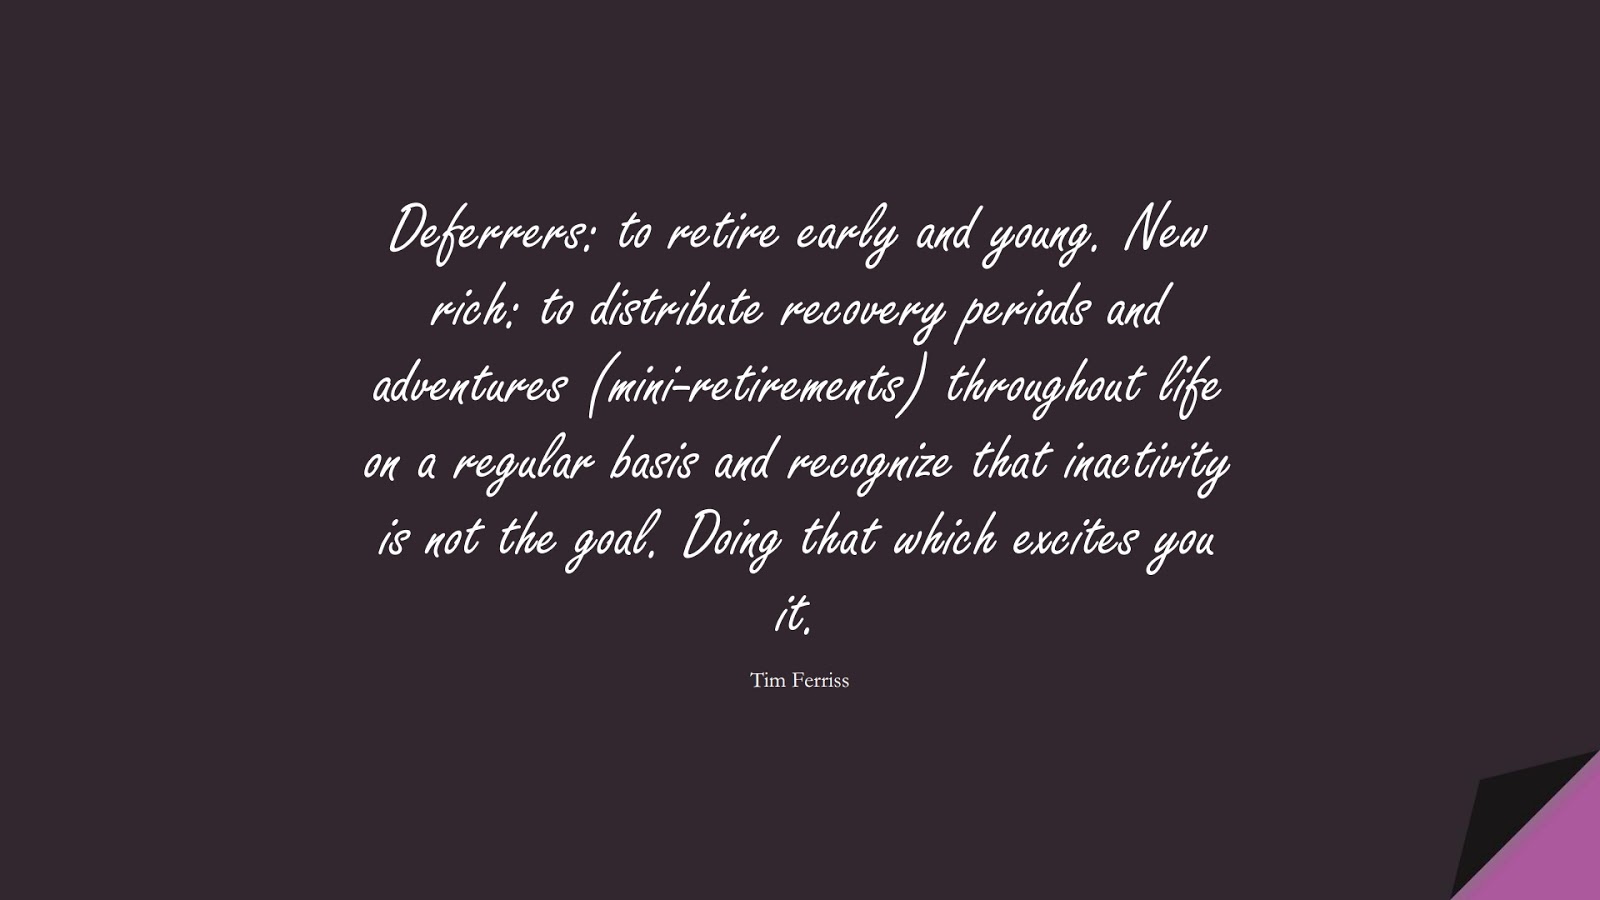 Deferrers: to retire early and young. New rich: to distribute recovery periods and adventures (mini-retirements) throughout life on a regular basis and recognize that inactivity is not the goal. Doing that which excites you it. (Tim Ferriss);  #TimFerrissQuotes